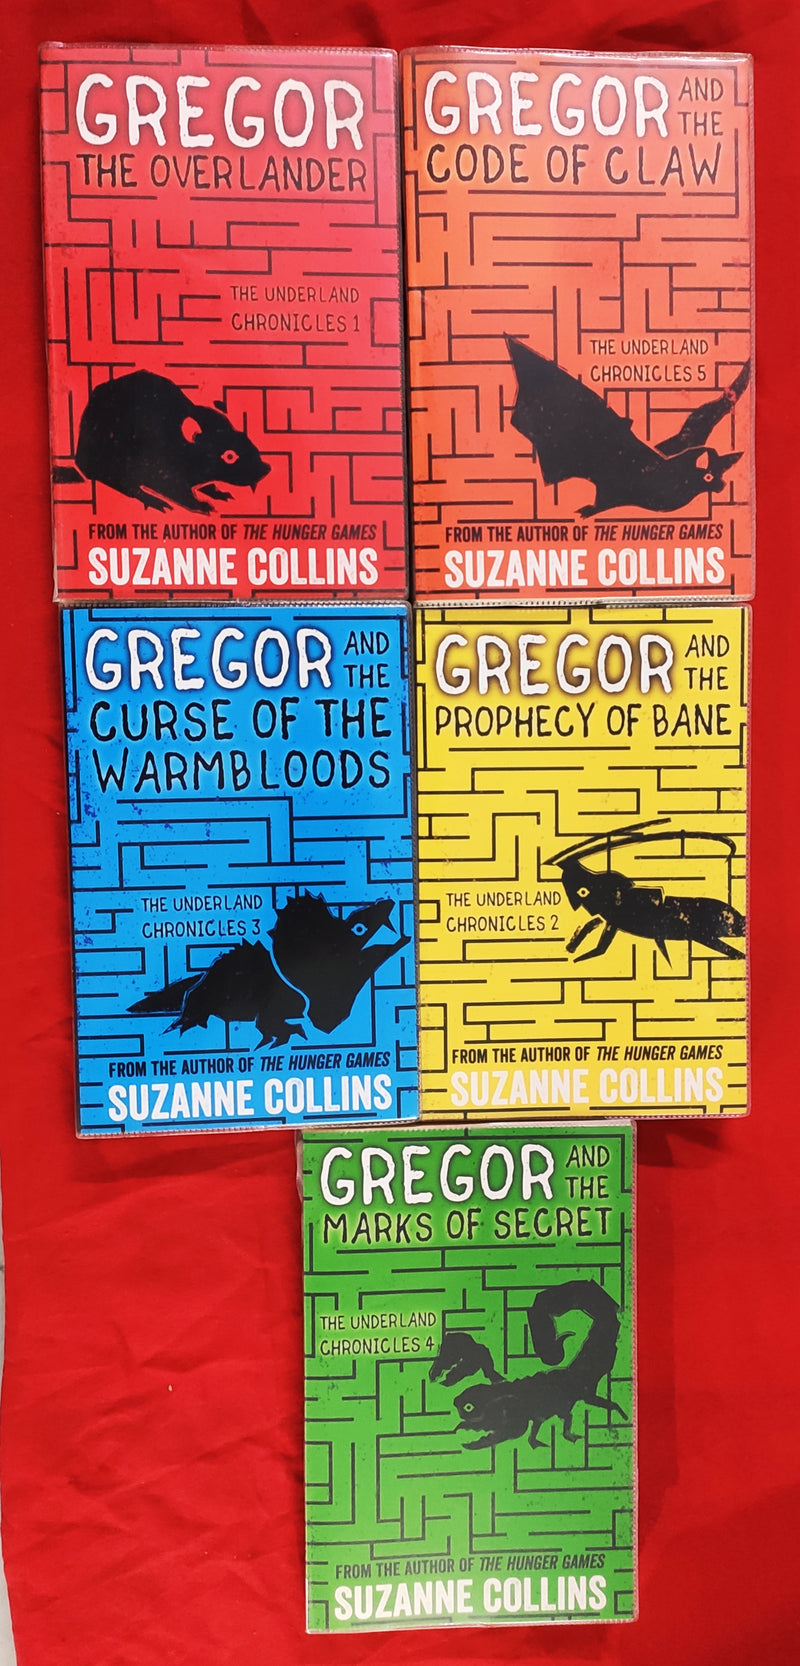 Suzanne Collins Gregor Series | Set of 5 Books | Vol. 1-5